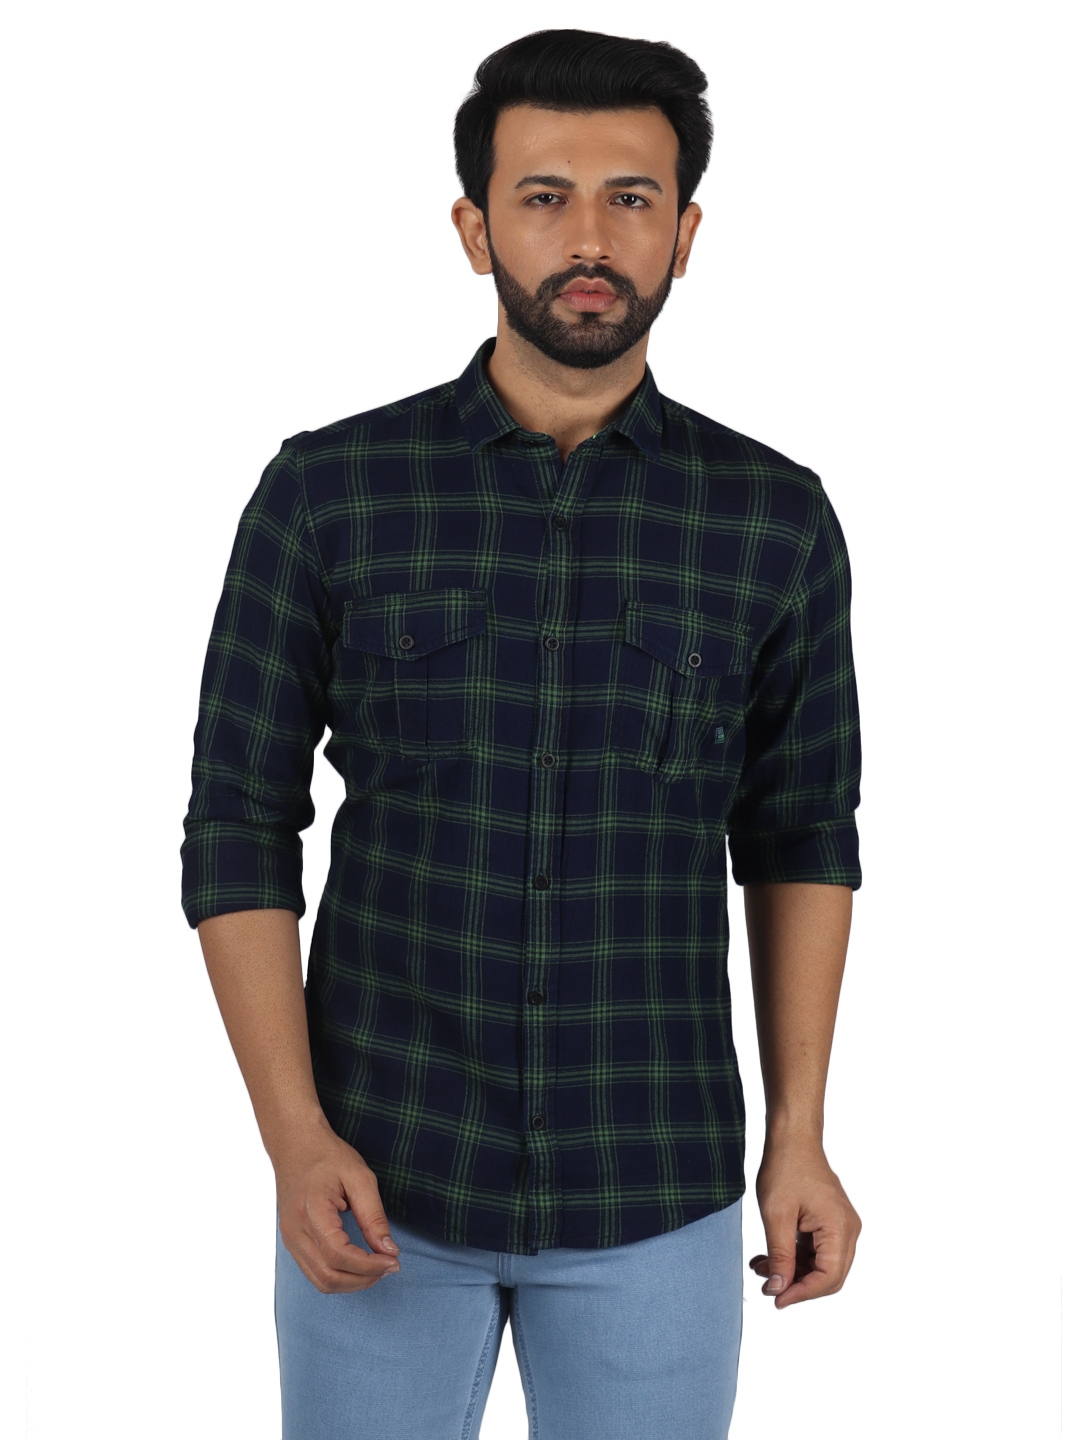 D'cot by Donear | D'cot by Donear Men's Green and Navy Cotton Casual Shirts 0